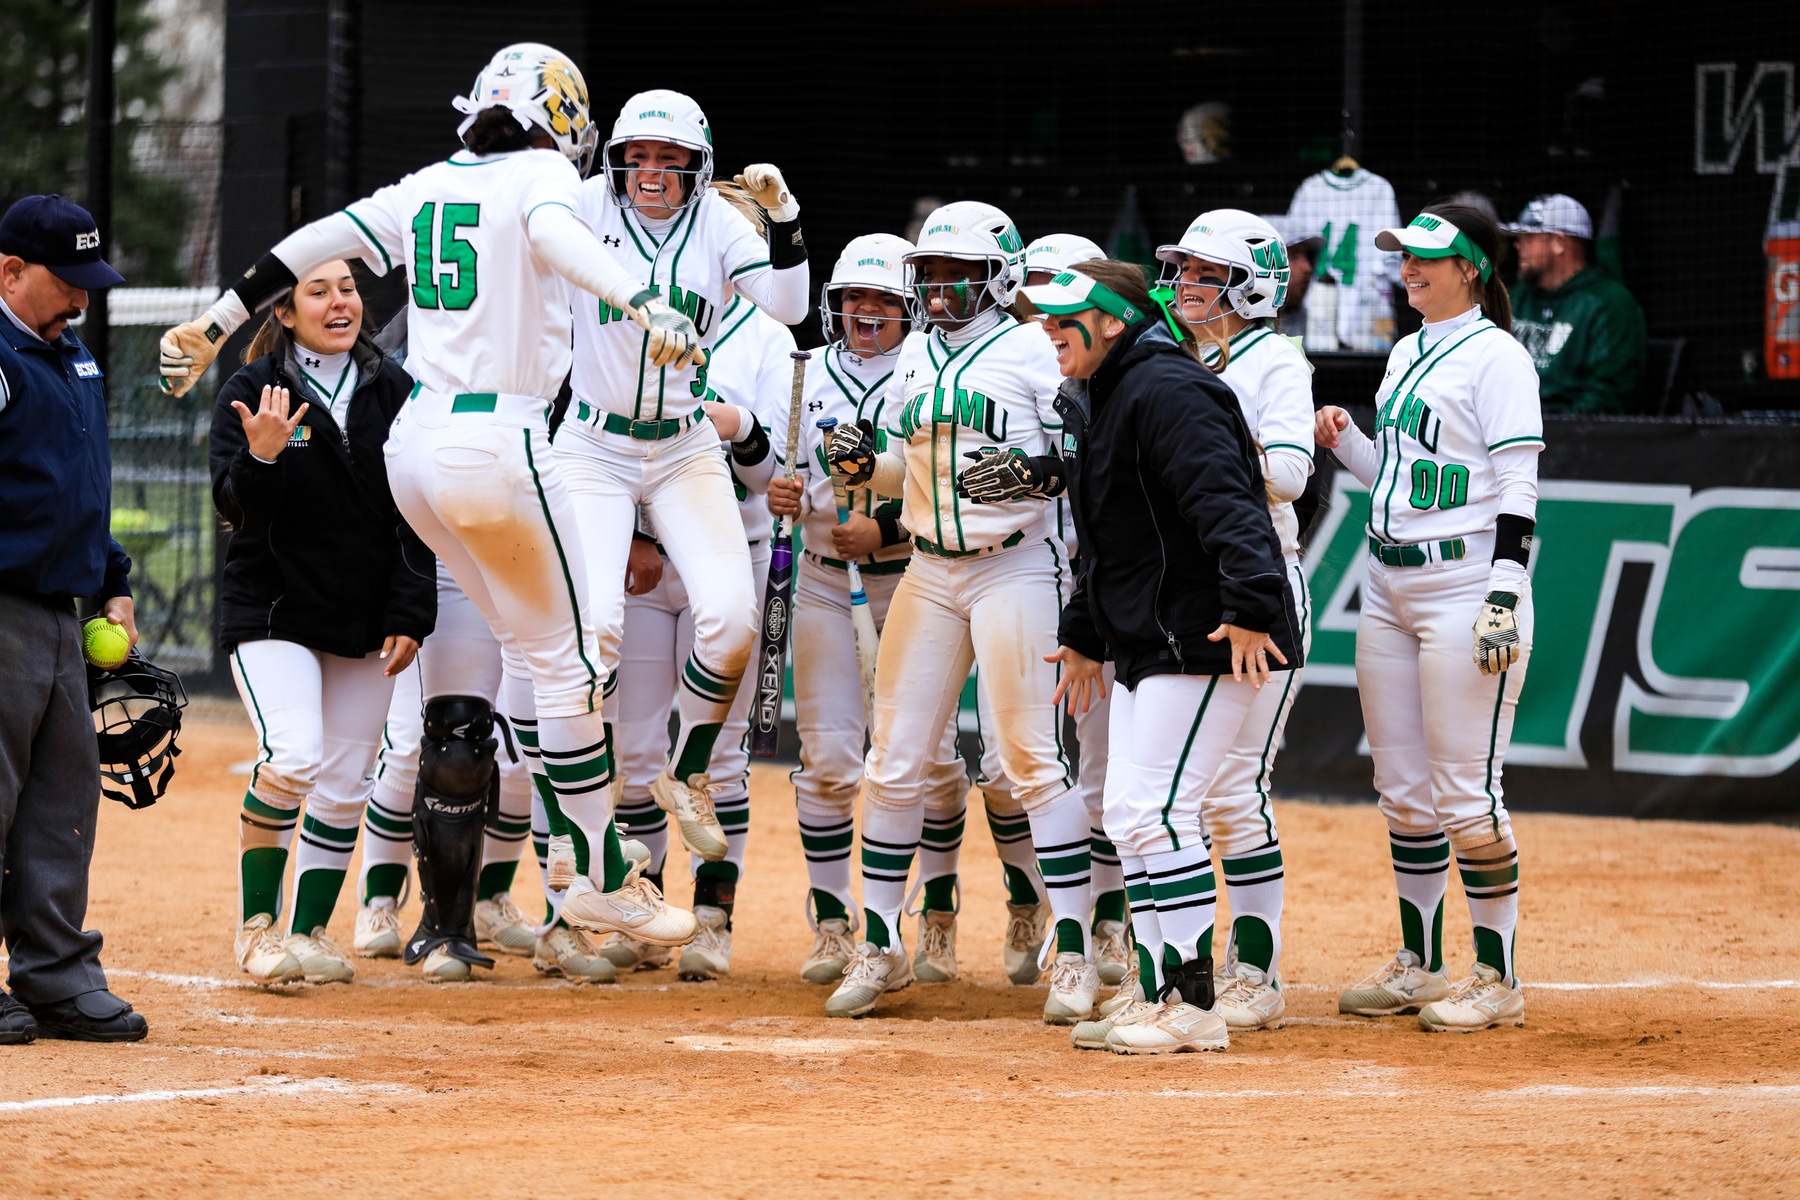 Copyright 2019; Wilmington University. All rights reserved. Photo of Kiana Broderson-Jones reaching home plate after her grand slam in game two. Photo by Chris Vitale. April 2, 2019 vs. Jefferson.